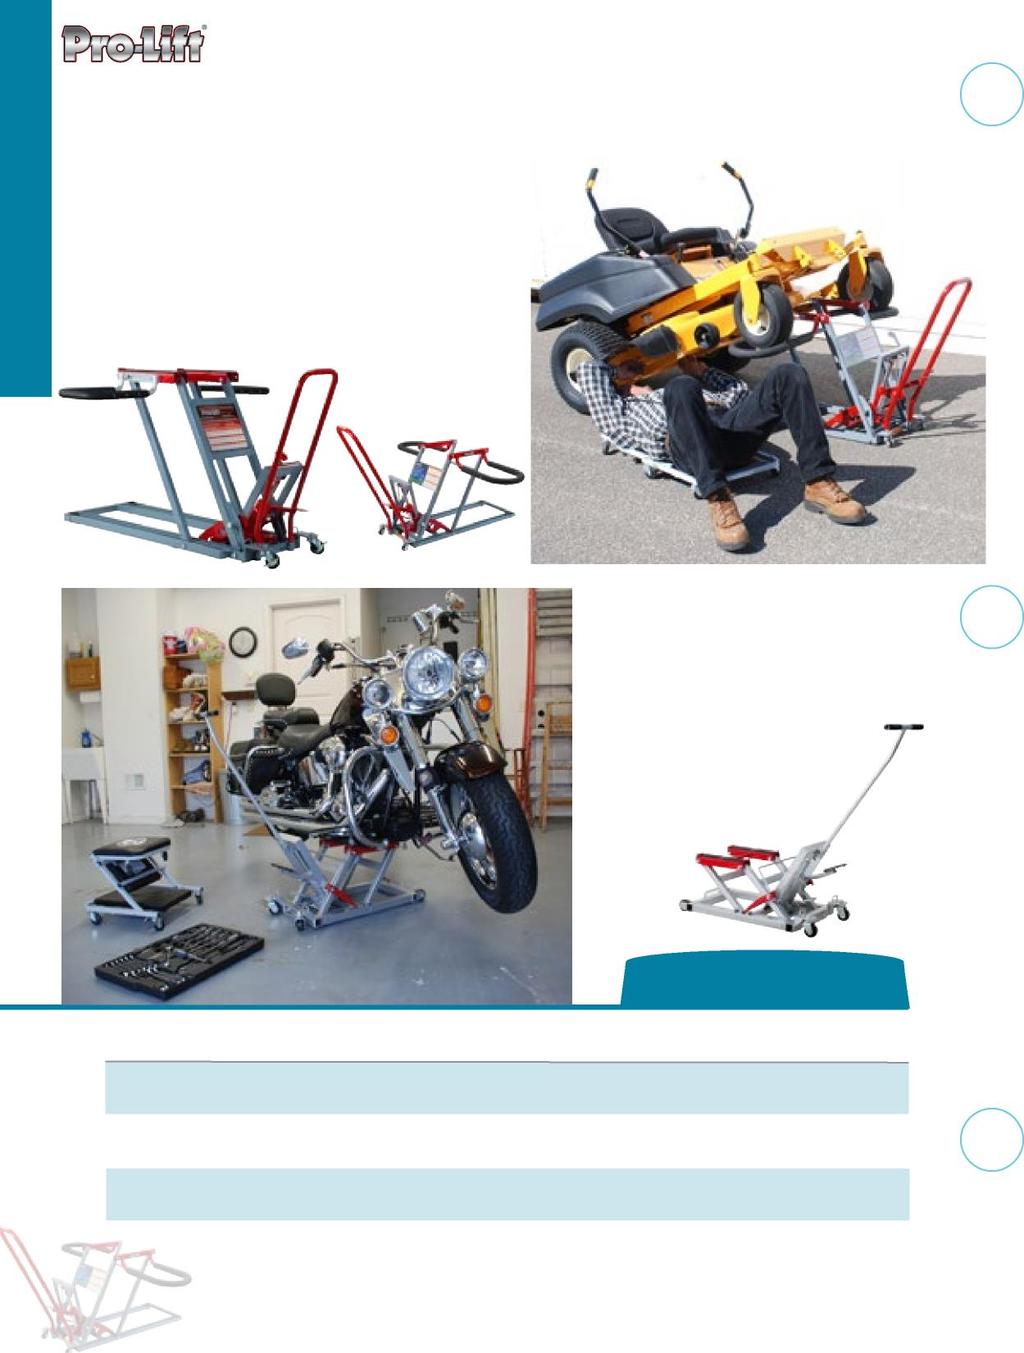 Specialty Lifts Specialty Lifts - Perform necessary mower maintenance - Easy, convenient hydraulically powered foot pedal operation - Rubber coated saddle to prevent unwanted movement - Welded solid